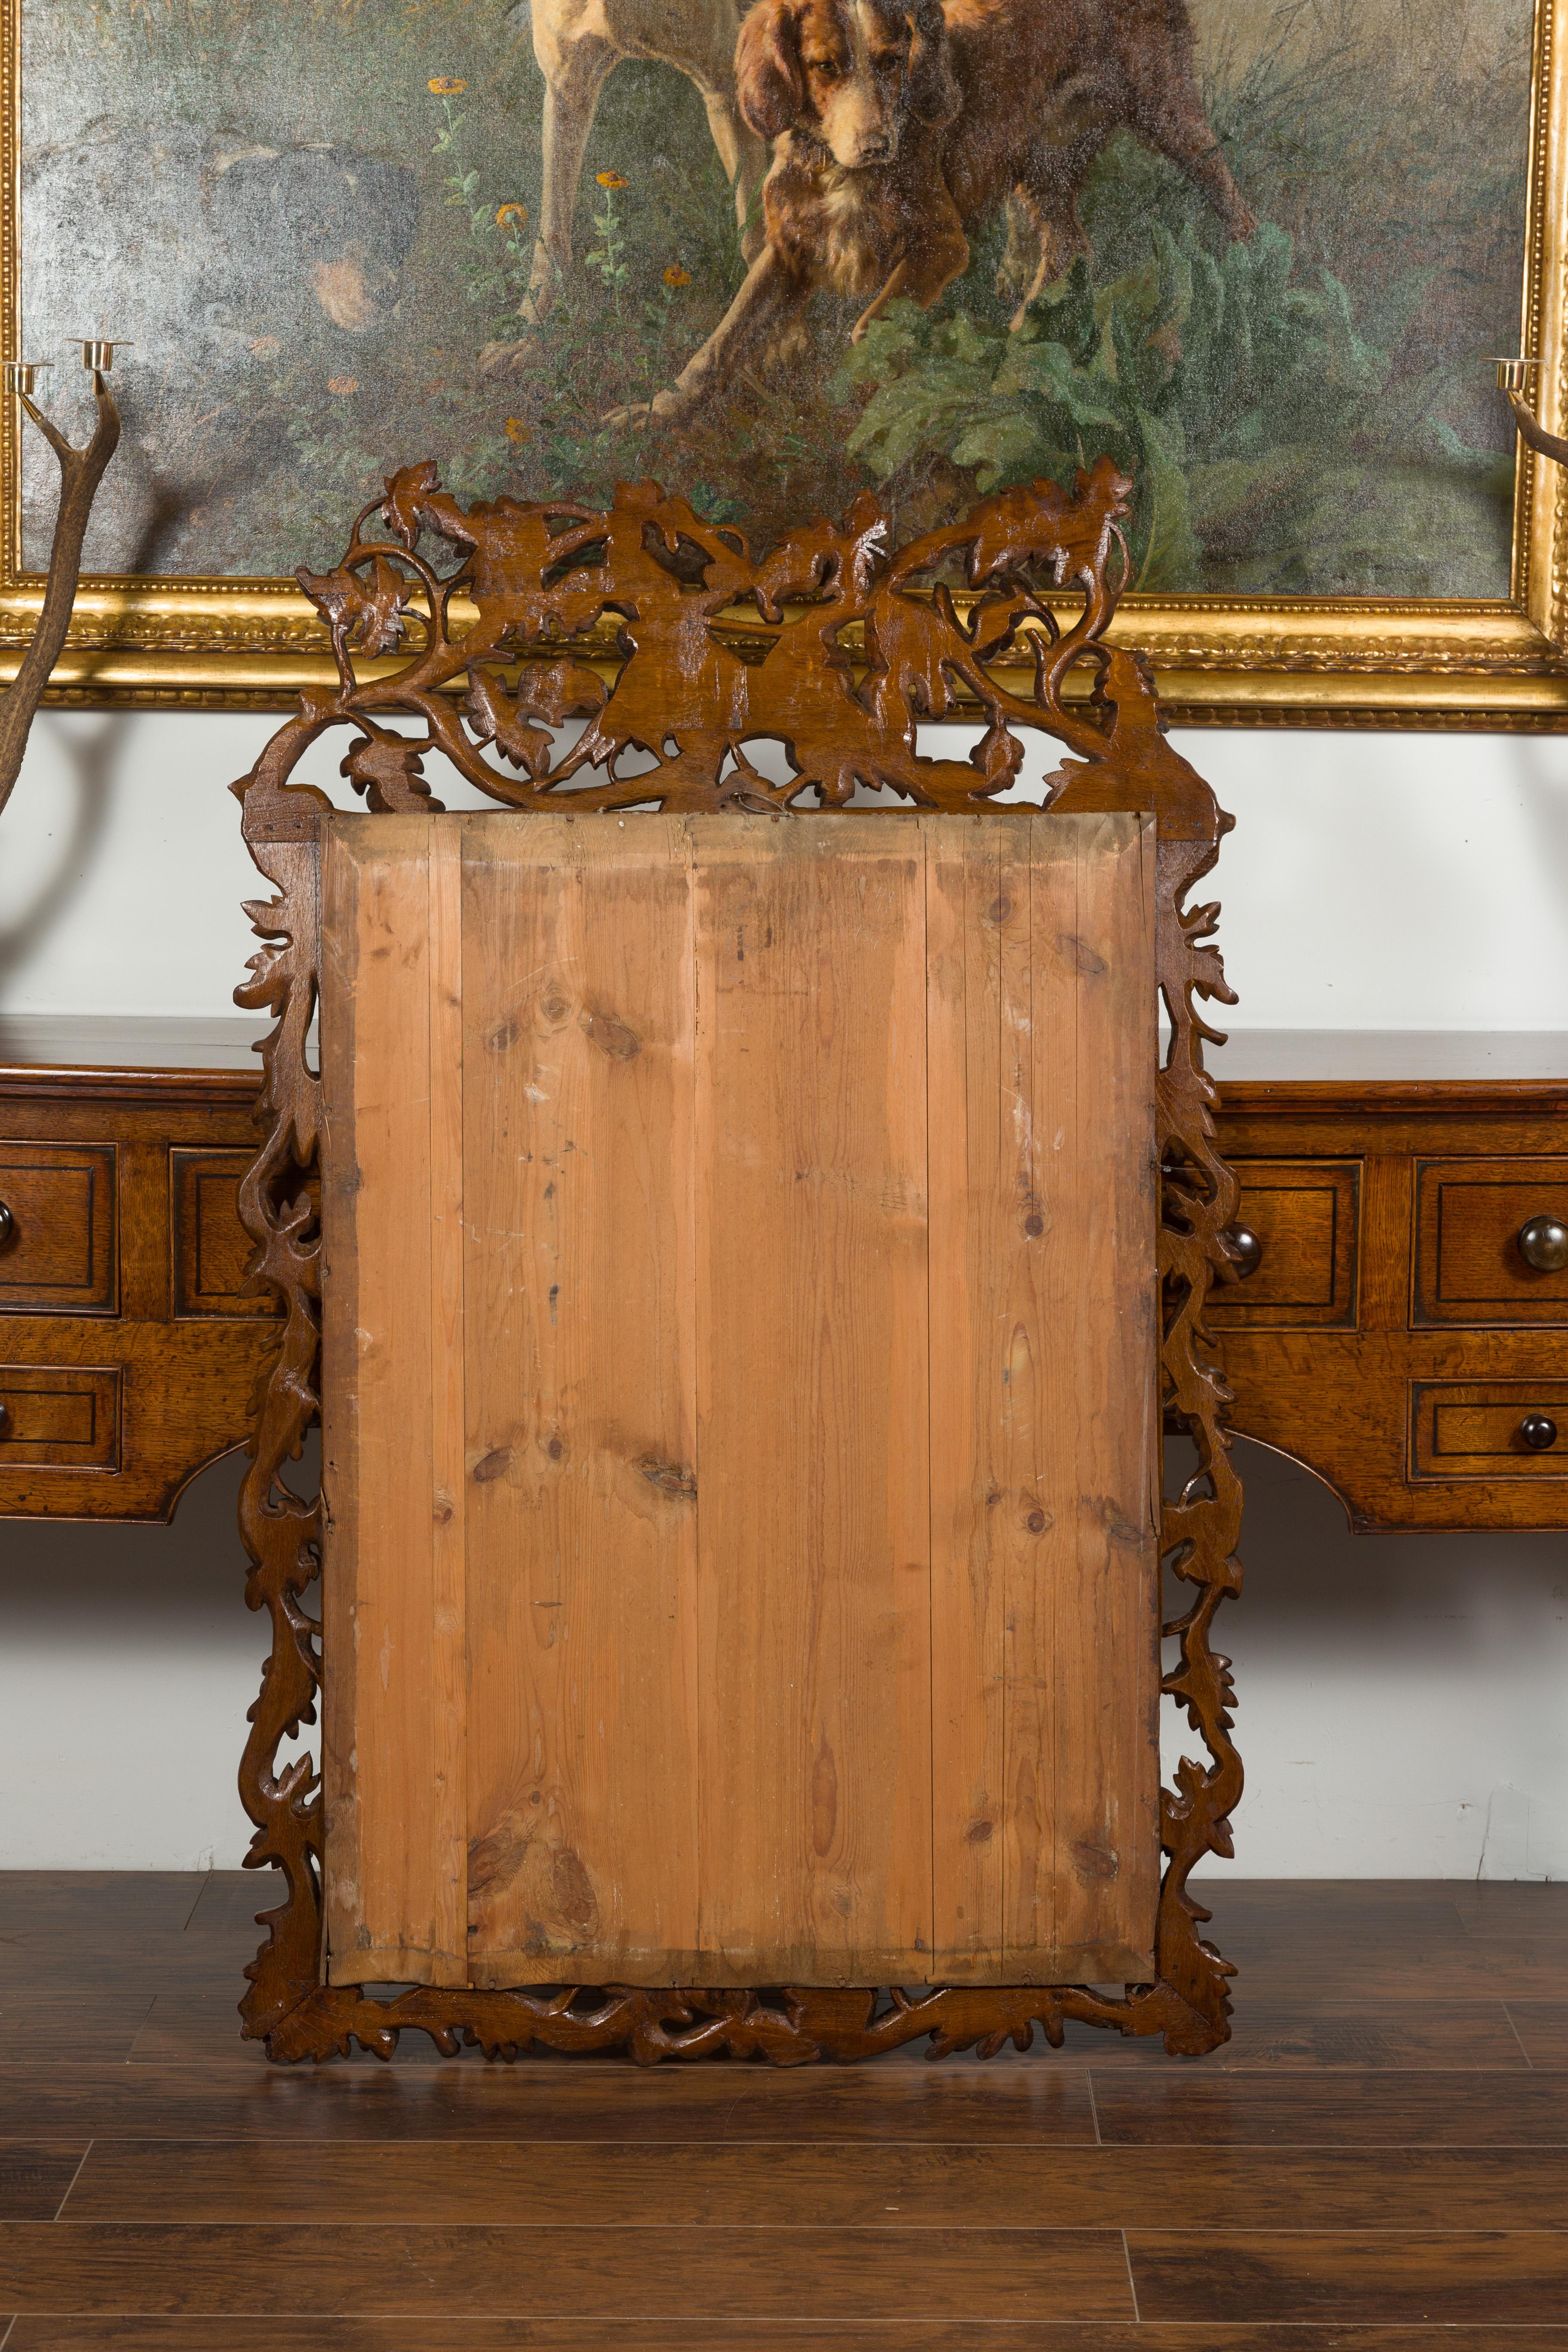 Black Forest Period 1900s Wooden Mirror with Carved Dog, Foliage and Fruits 8